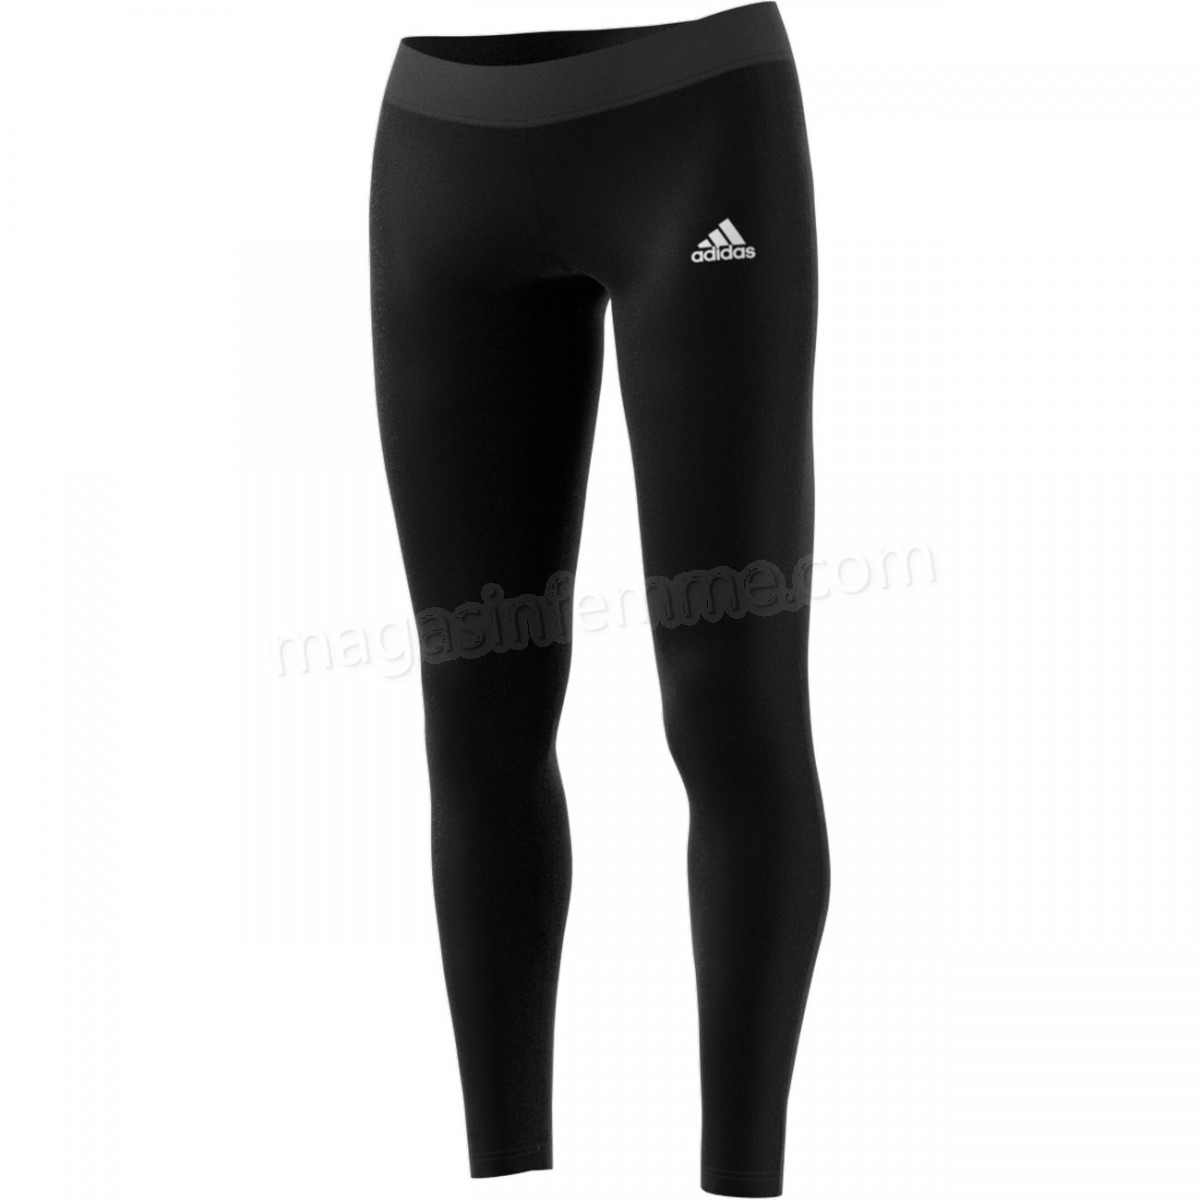 Adidas-Fitness femme ADIDAS Collant femme adidas Must Haves 3-Stripes en solde - -4